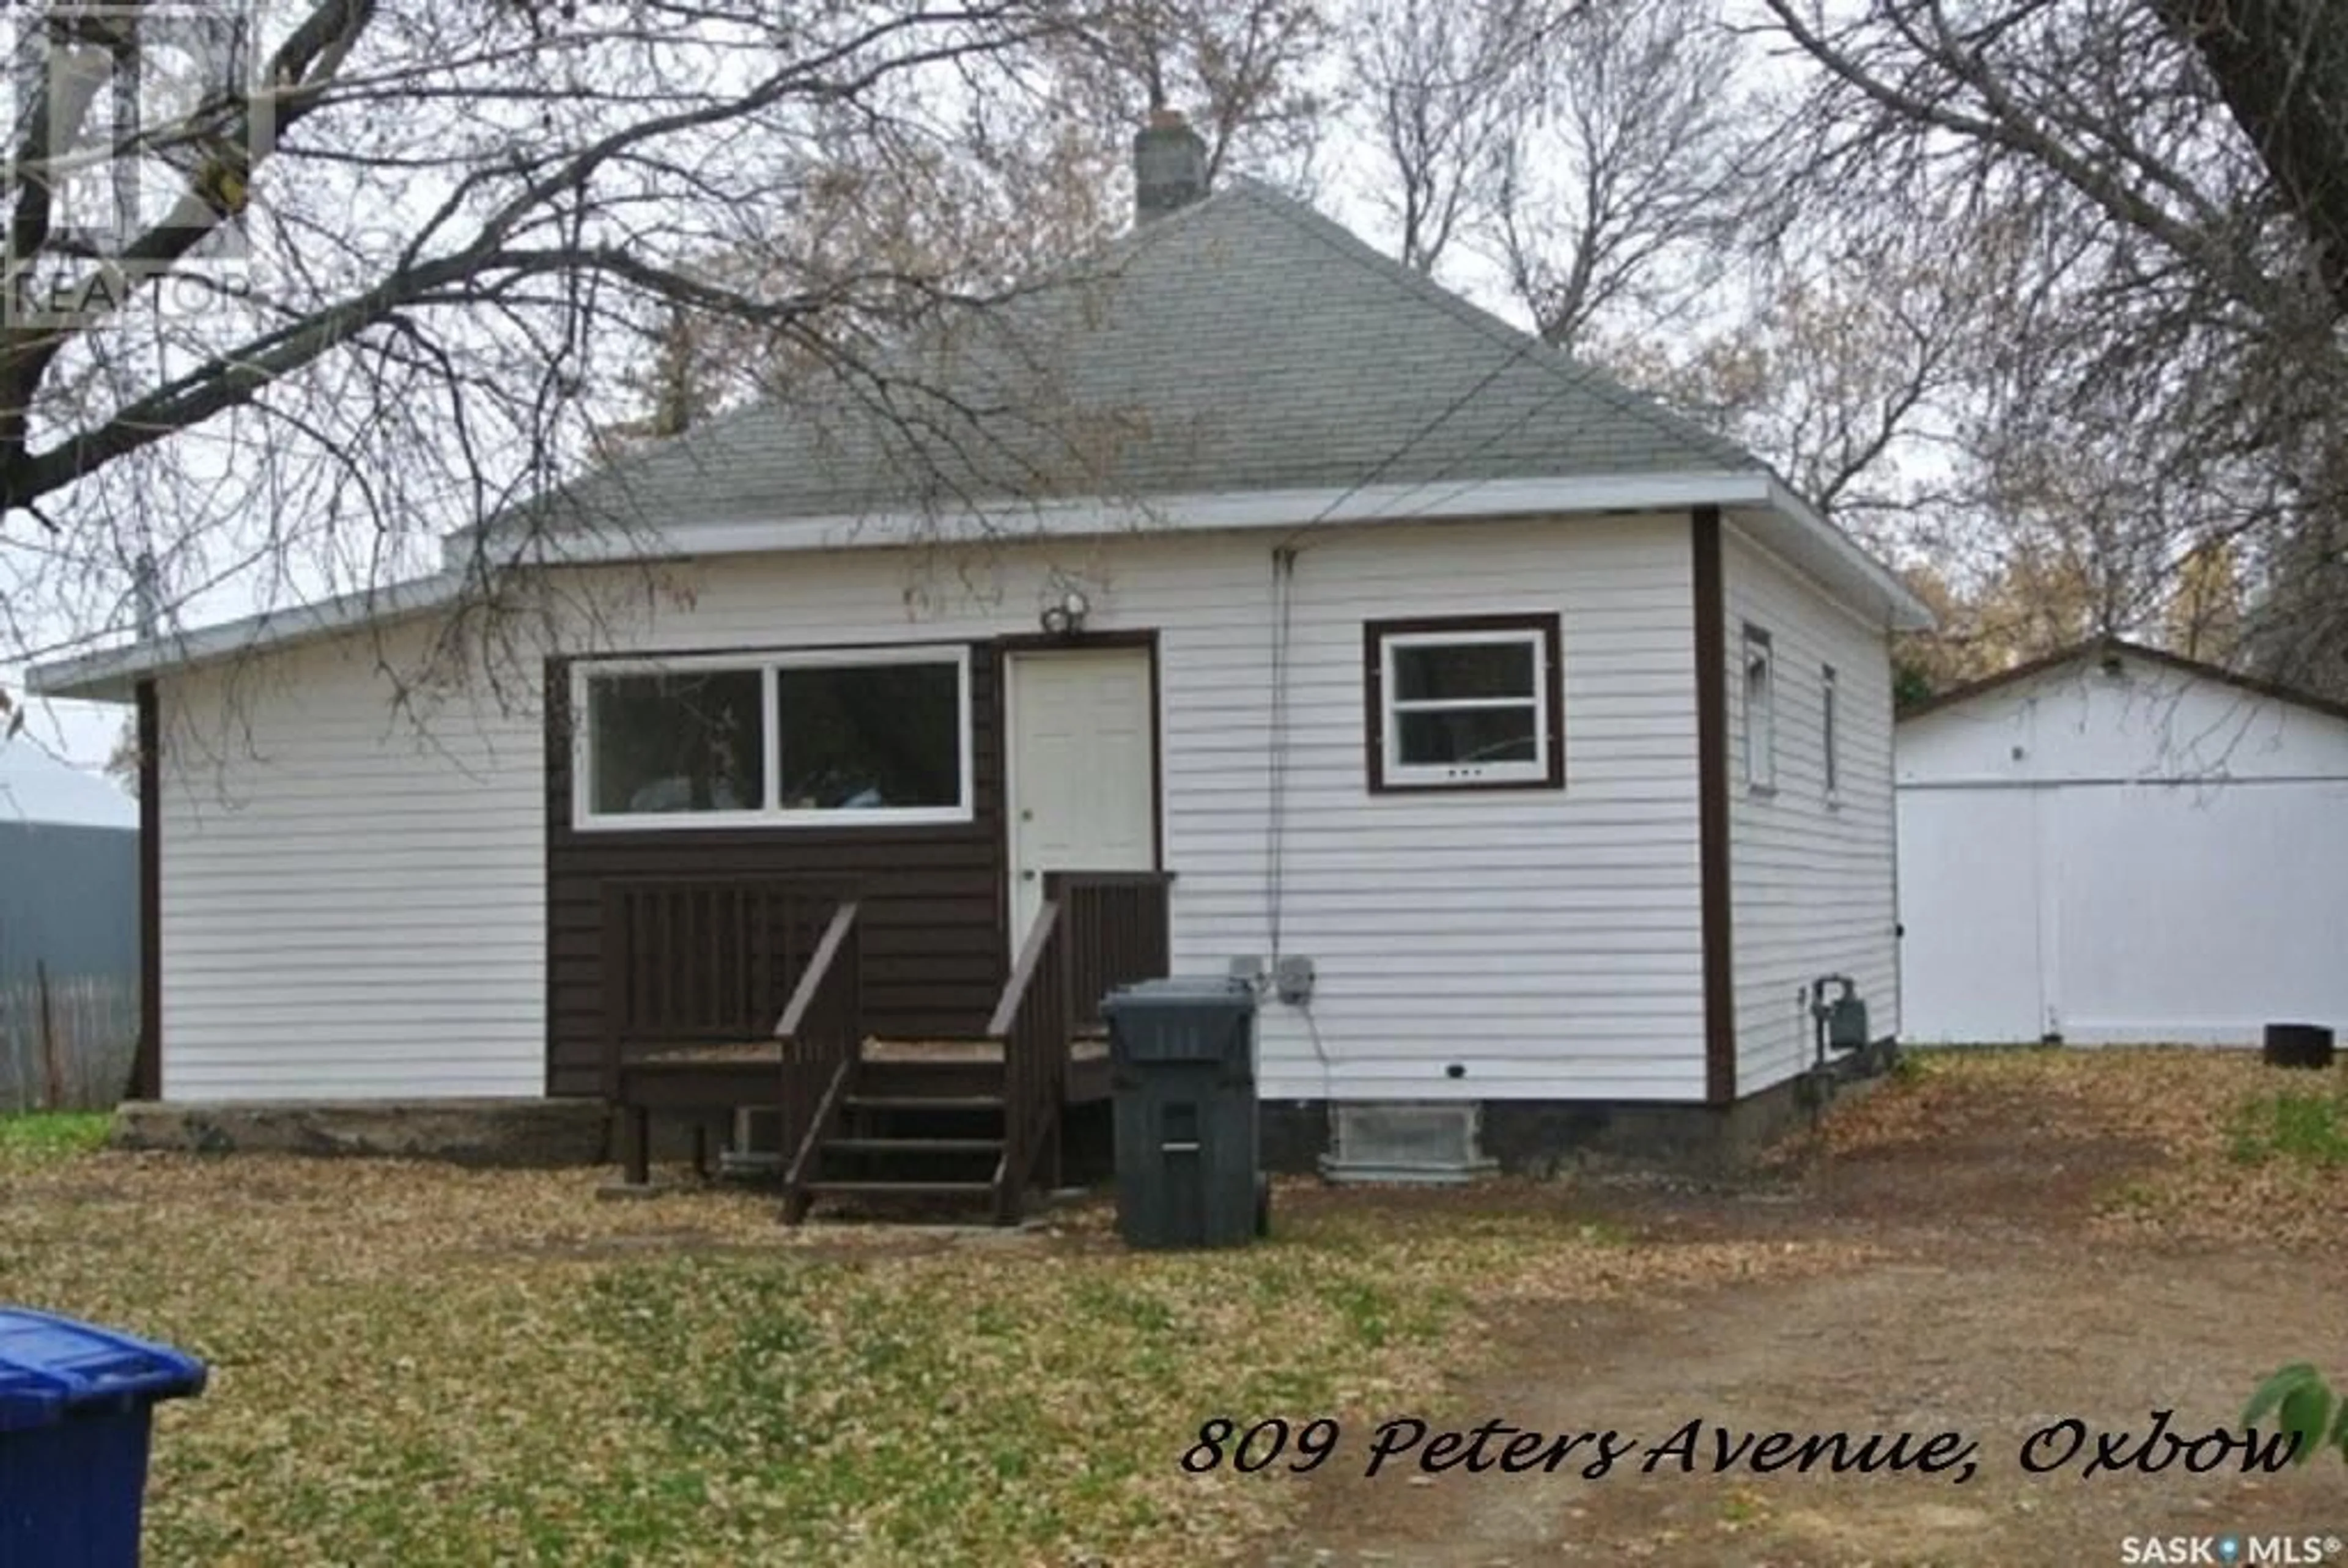 Frontside or backside of a home for 809 Peters AVENUE, Oxbow Saskatchewan S0C2B0